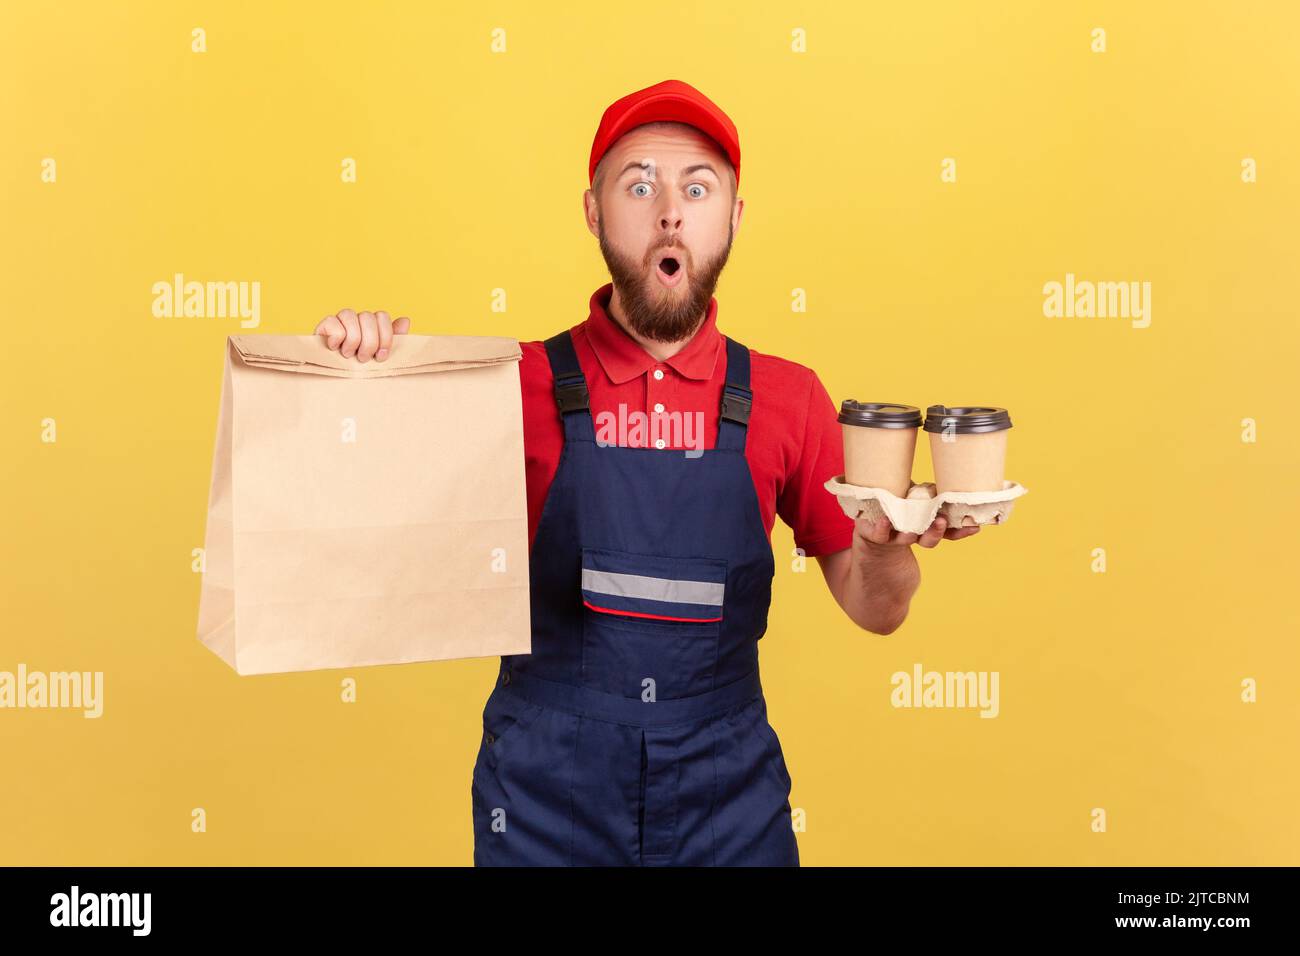 Portrait of astonished barded deliveryman wearing uniform holding paper package and take away coffee in hands, fast delivery, breakfast. Indoor studio shot isolated on yellow background. Stock Photo